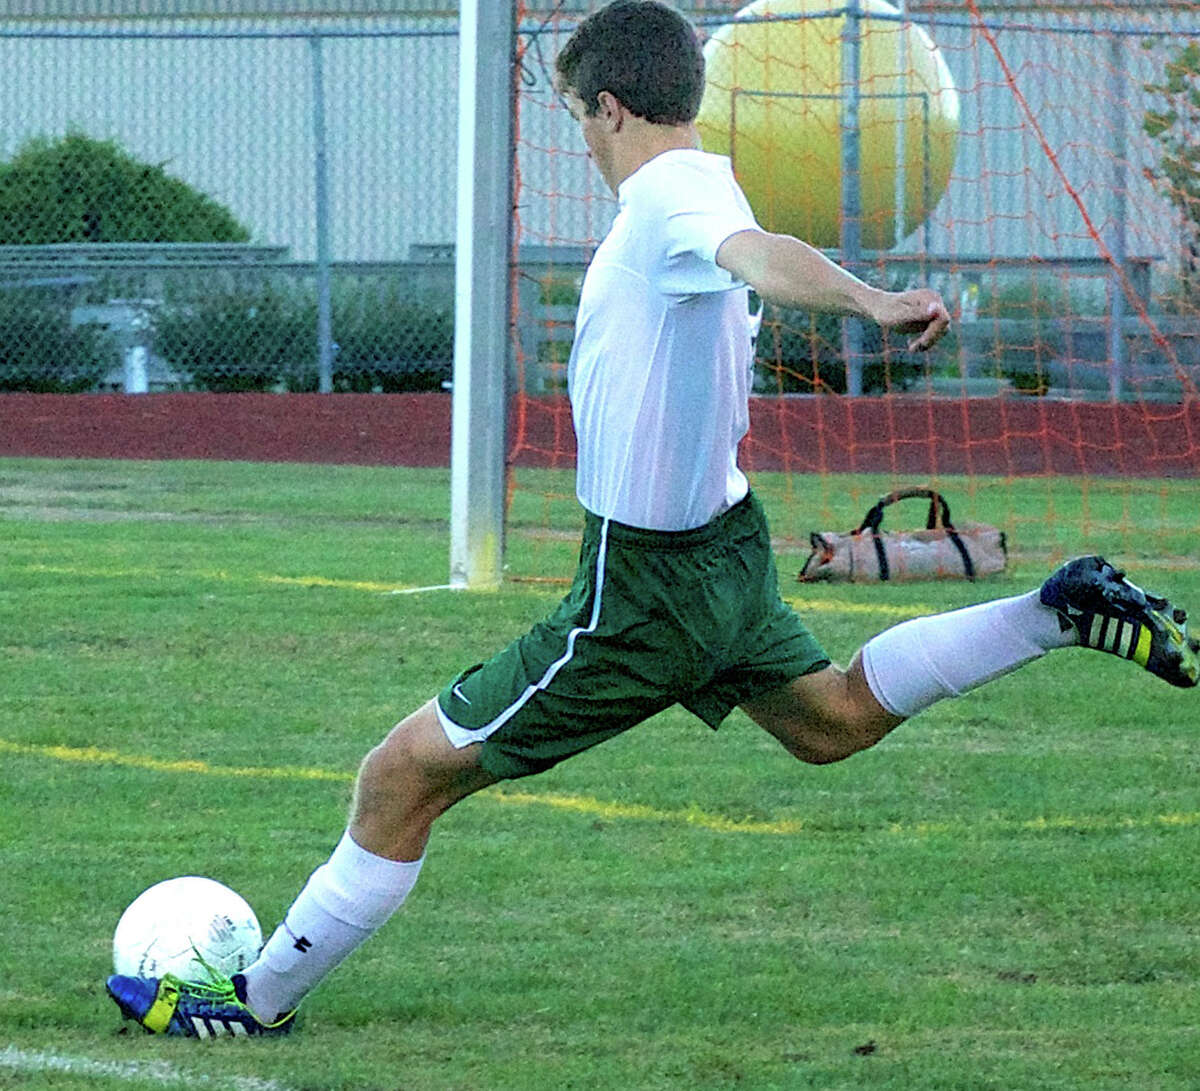 Spencer Ranno of the Green Wave clears the ball from the defensive zone during New Milford High School boys' soccer's 3-1 victory over Stratford, Sept. 23, 2013 at NMHS.